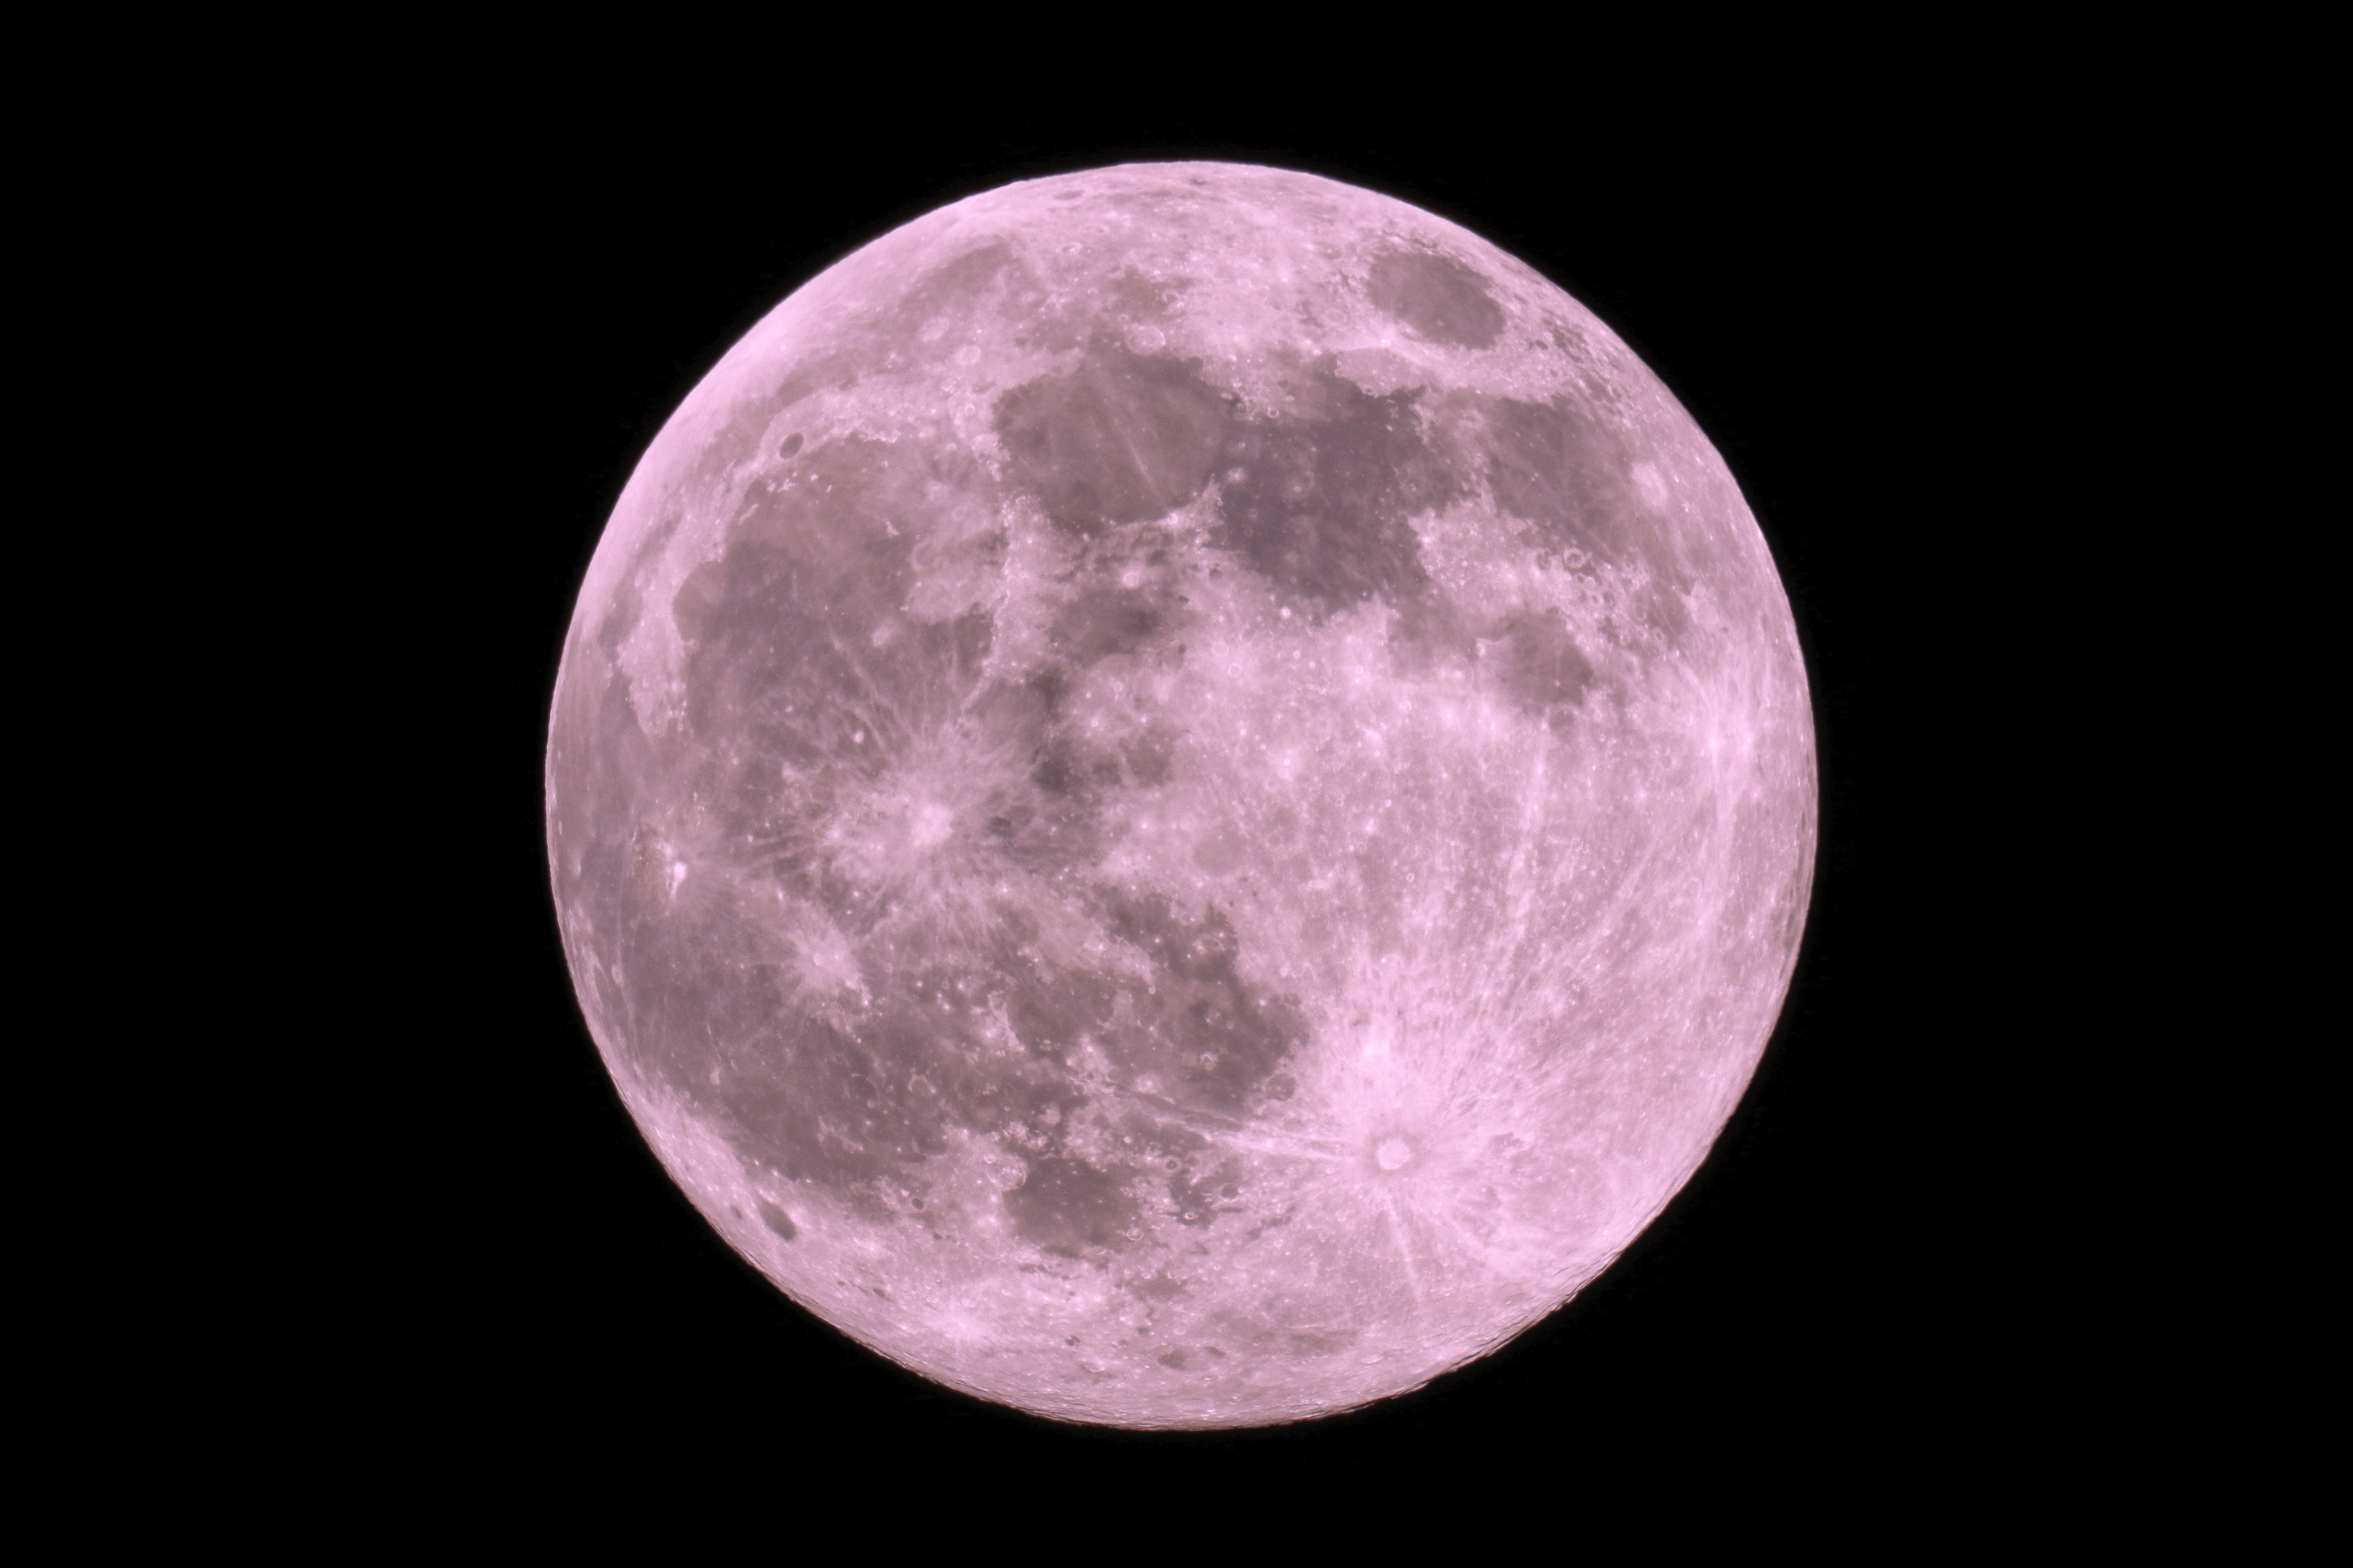 2021's first supermoon: The Pink Moon will light up the sky this